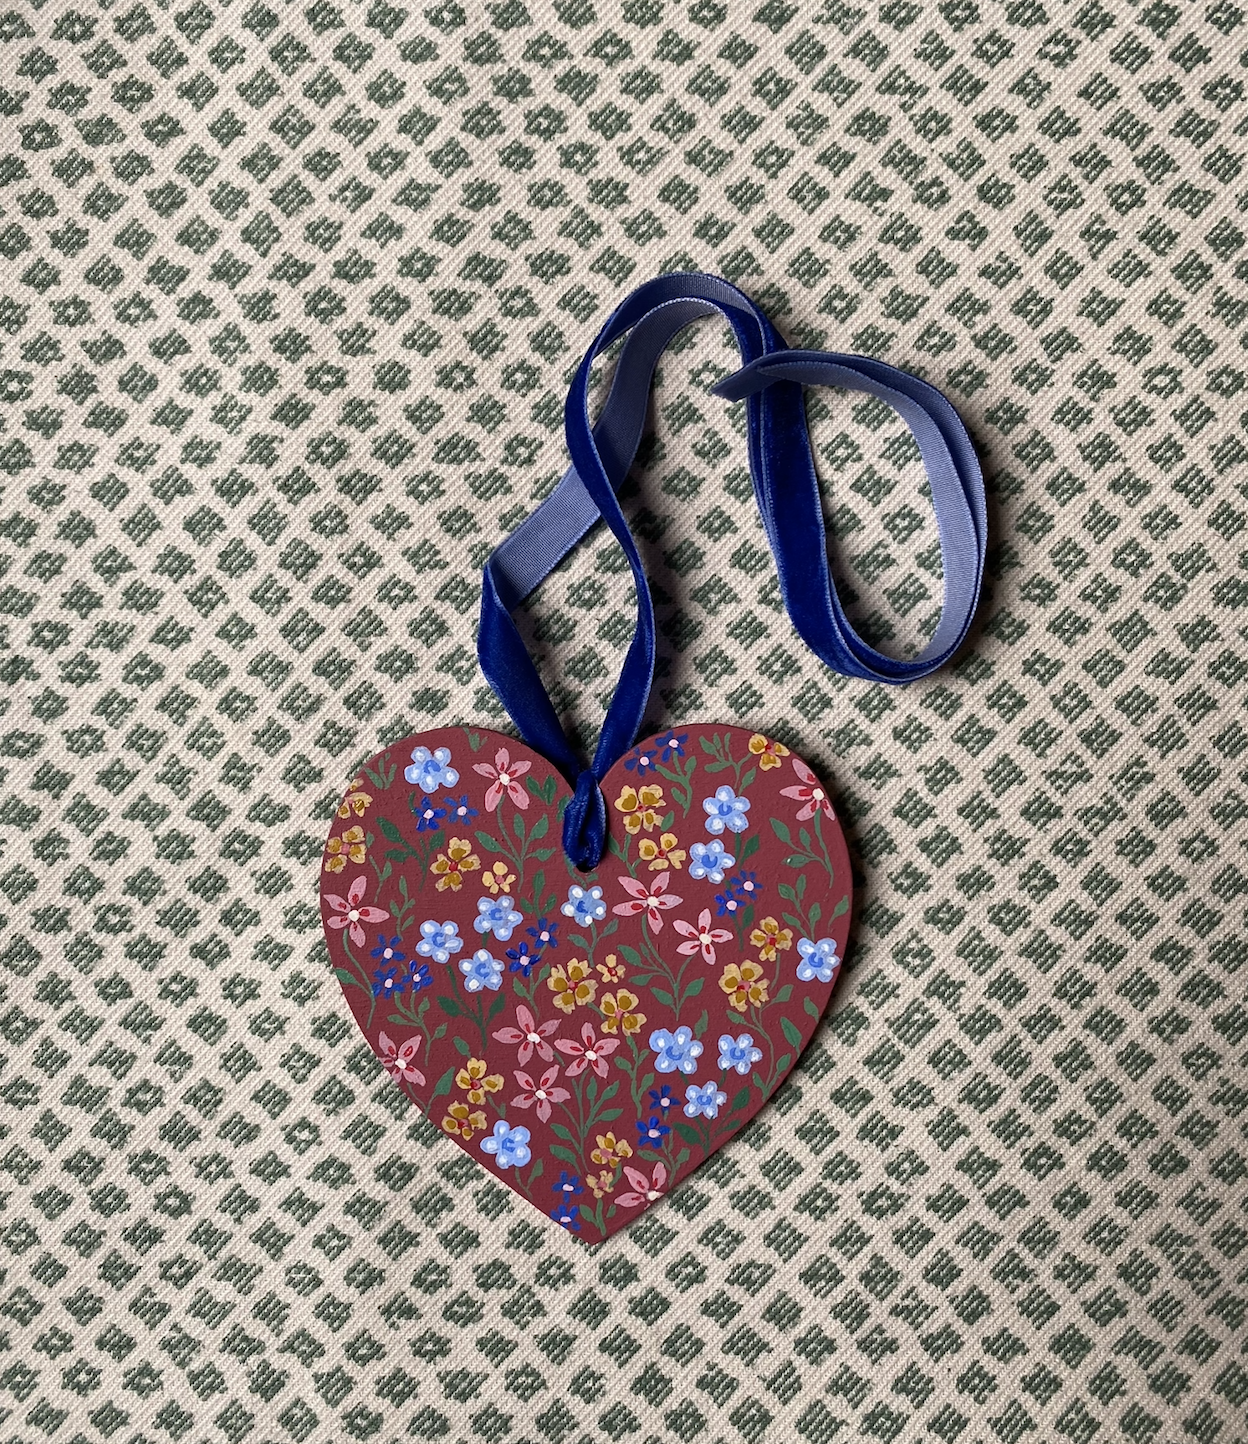 Wooden heart gift tag - Meadow flowers